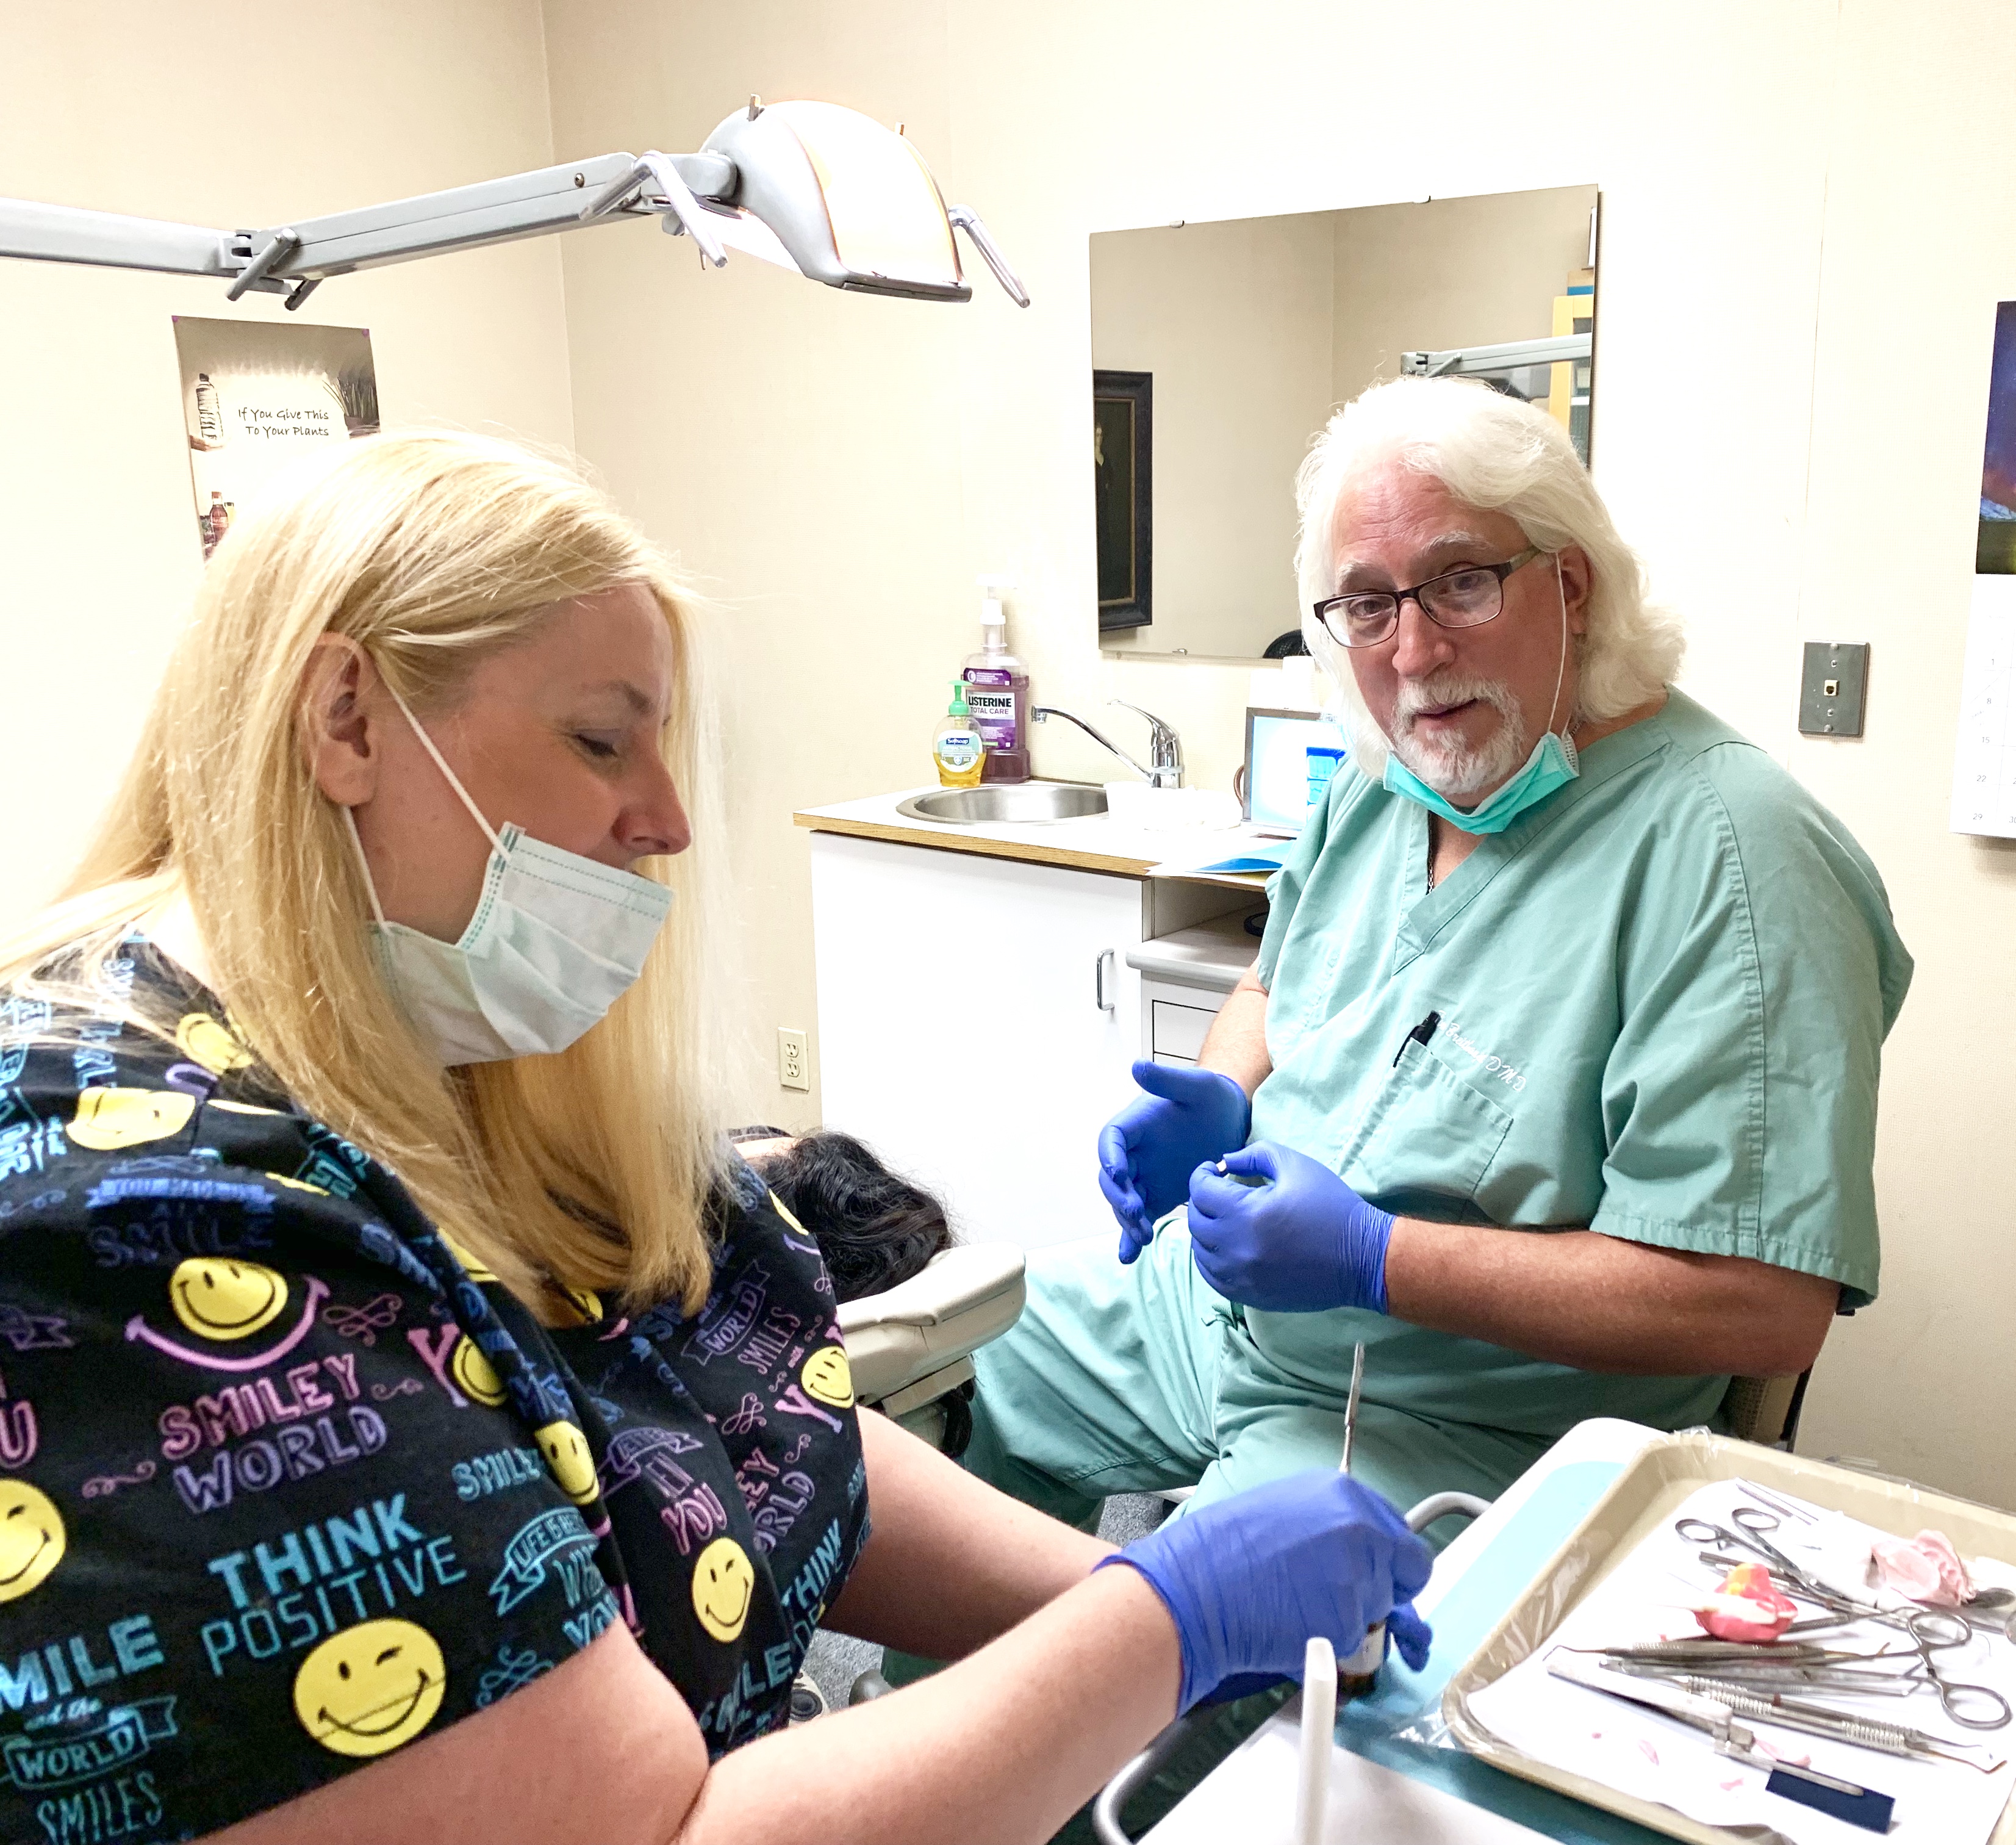 Dr Tom Briethaupt and Renee deliver the best in dental care at Audubon Family Dentistry.